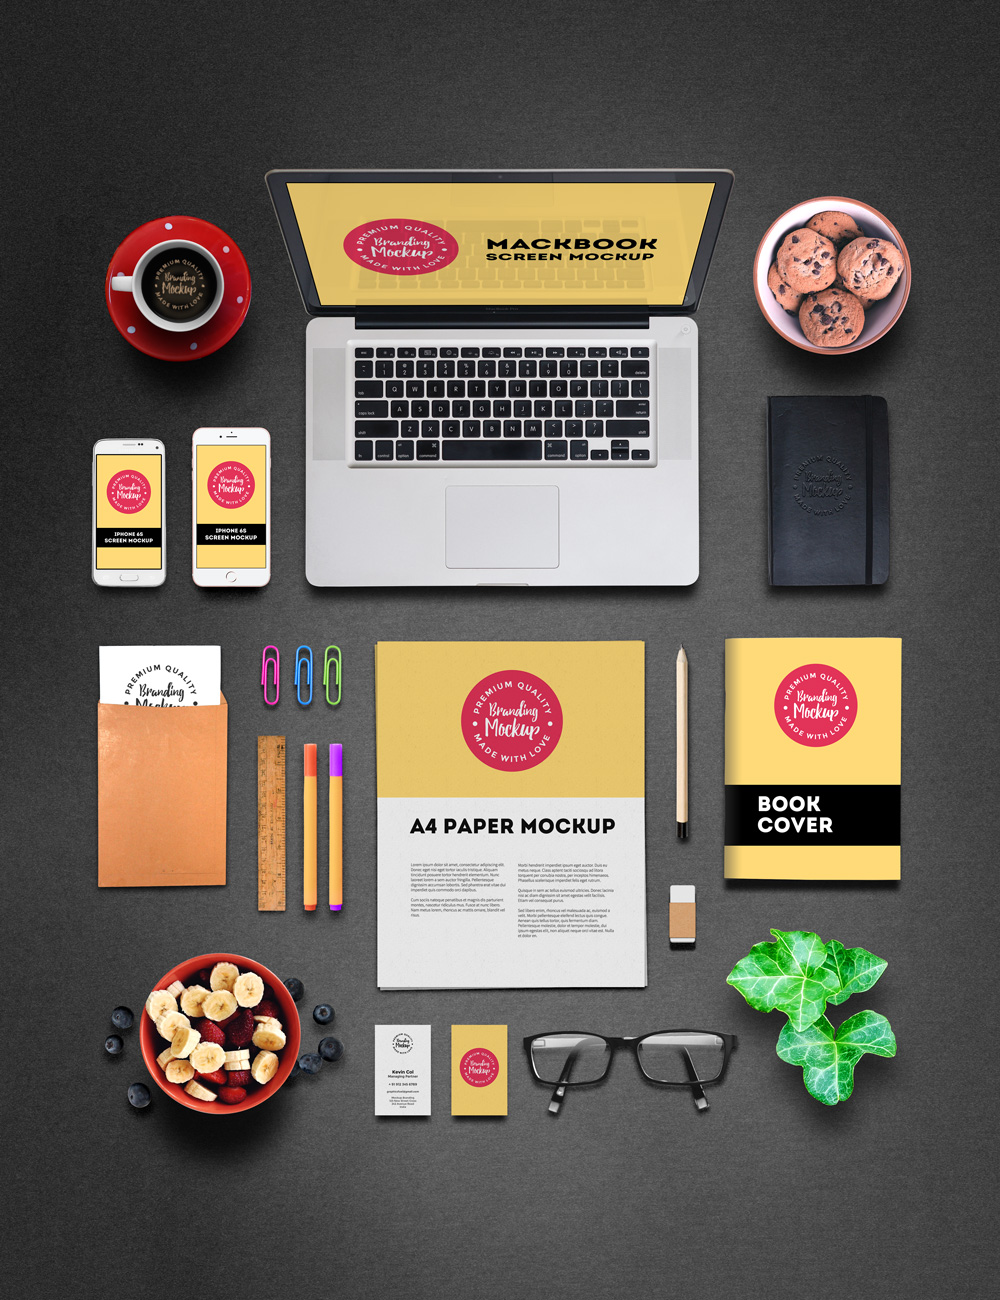 Download Branding and Identity Mockup - GraphicsFuel